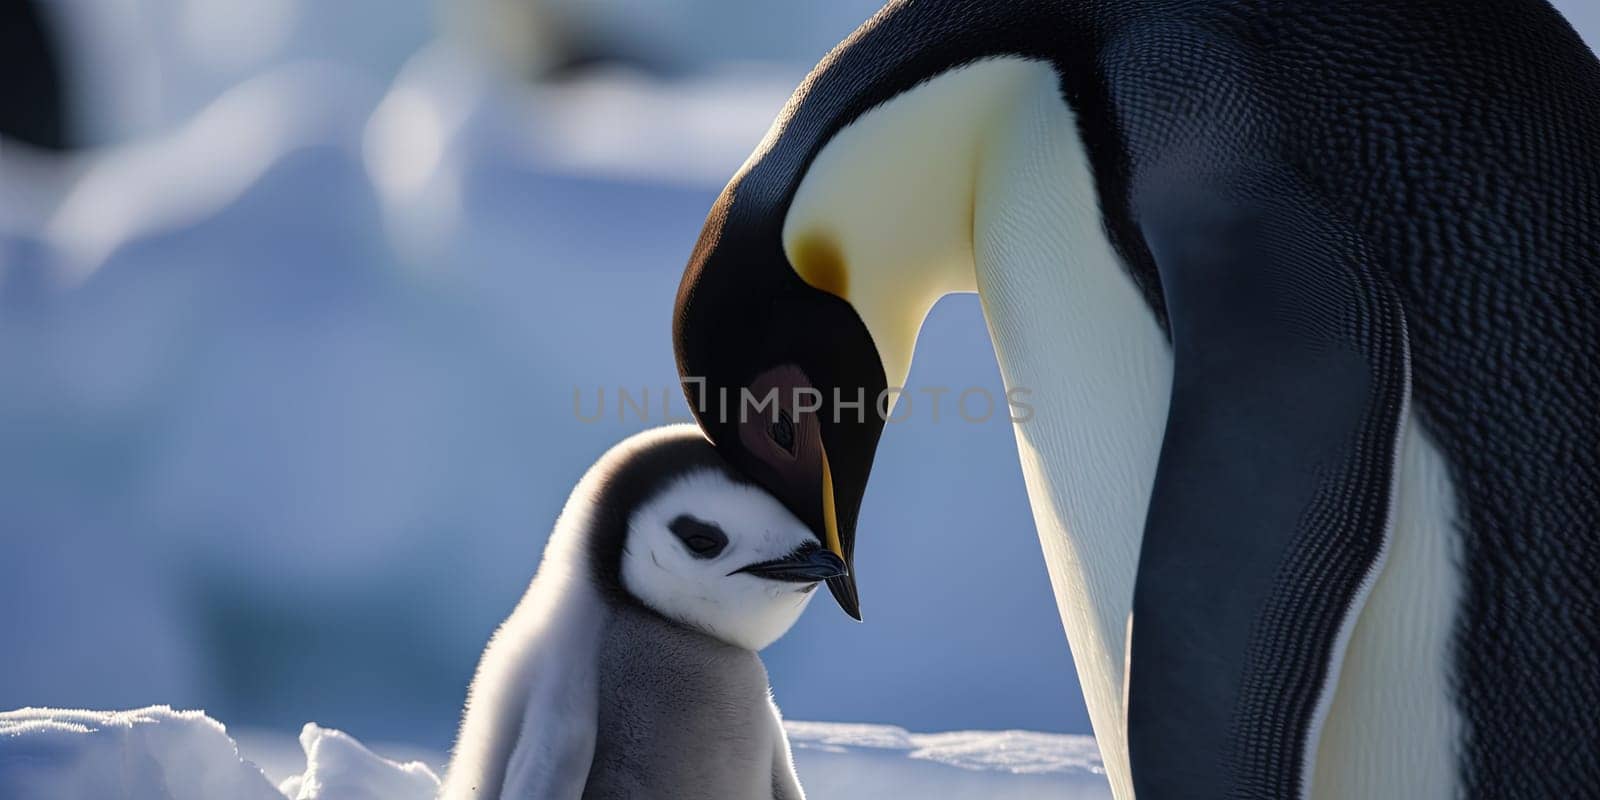 Baby penguin along with its mother on a winter background with snow